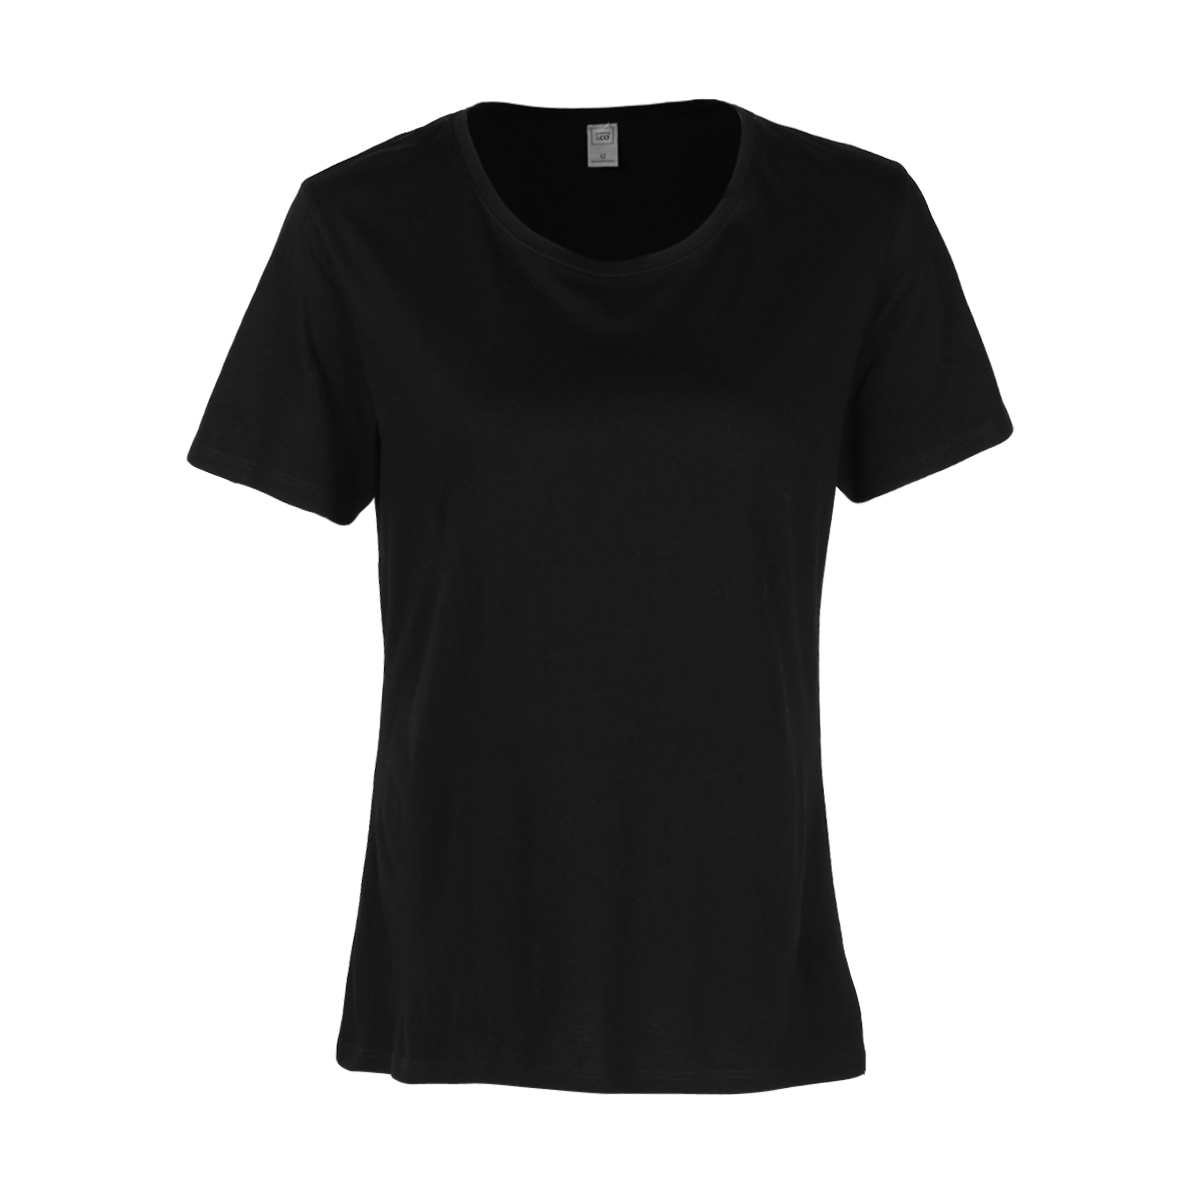 Basic Tee Kmart - hover over image to zoom